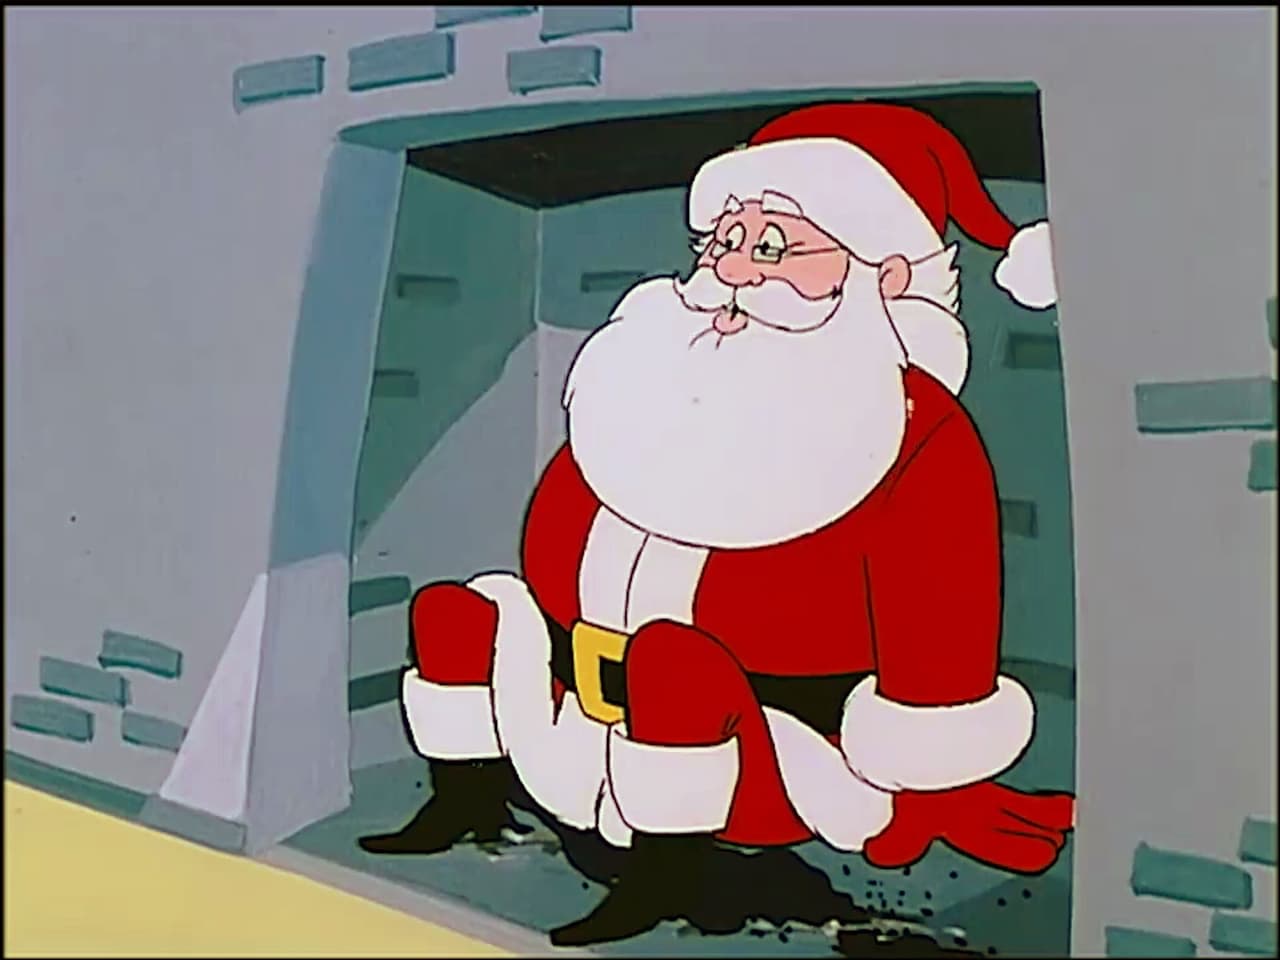 Insanity Claus